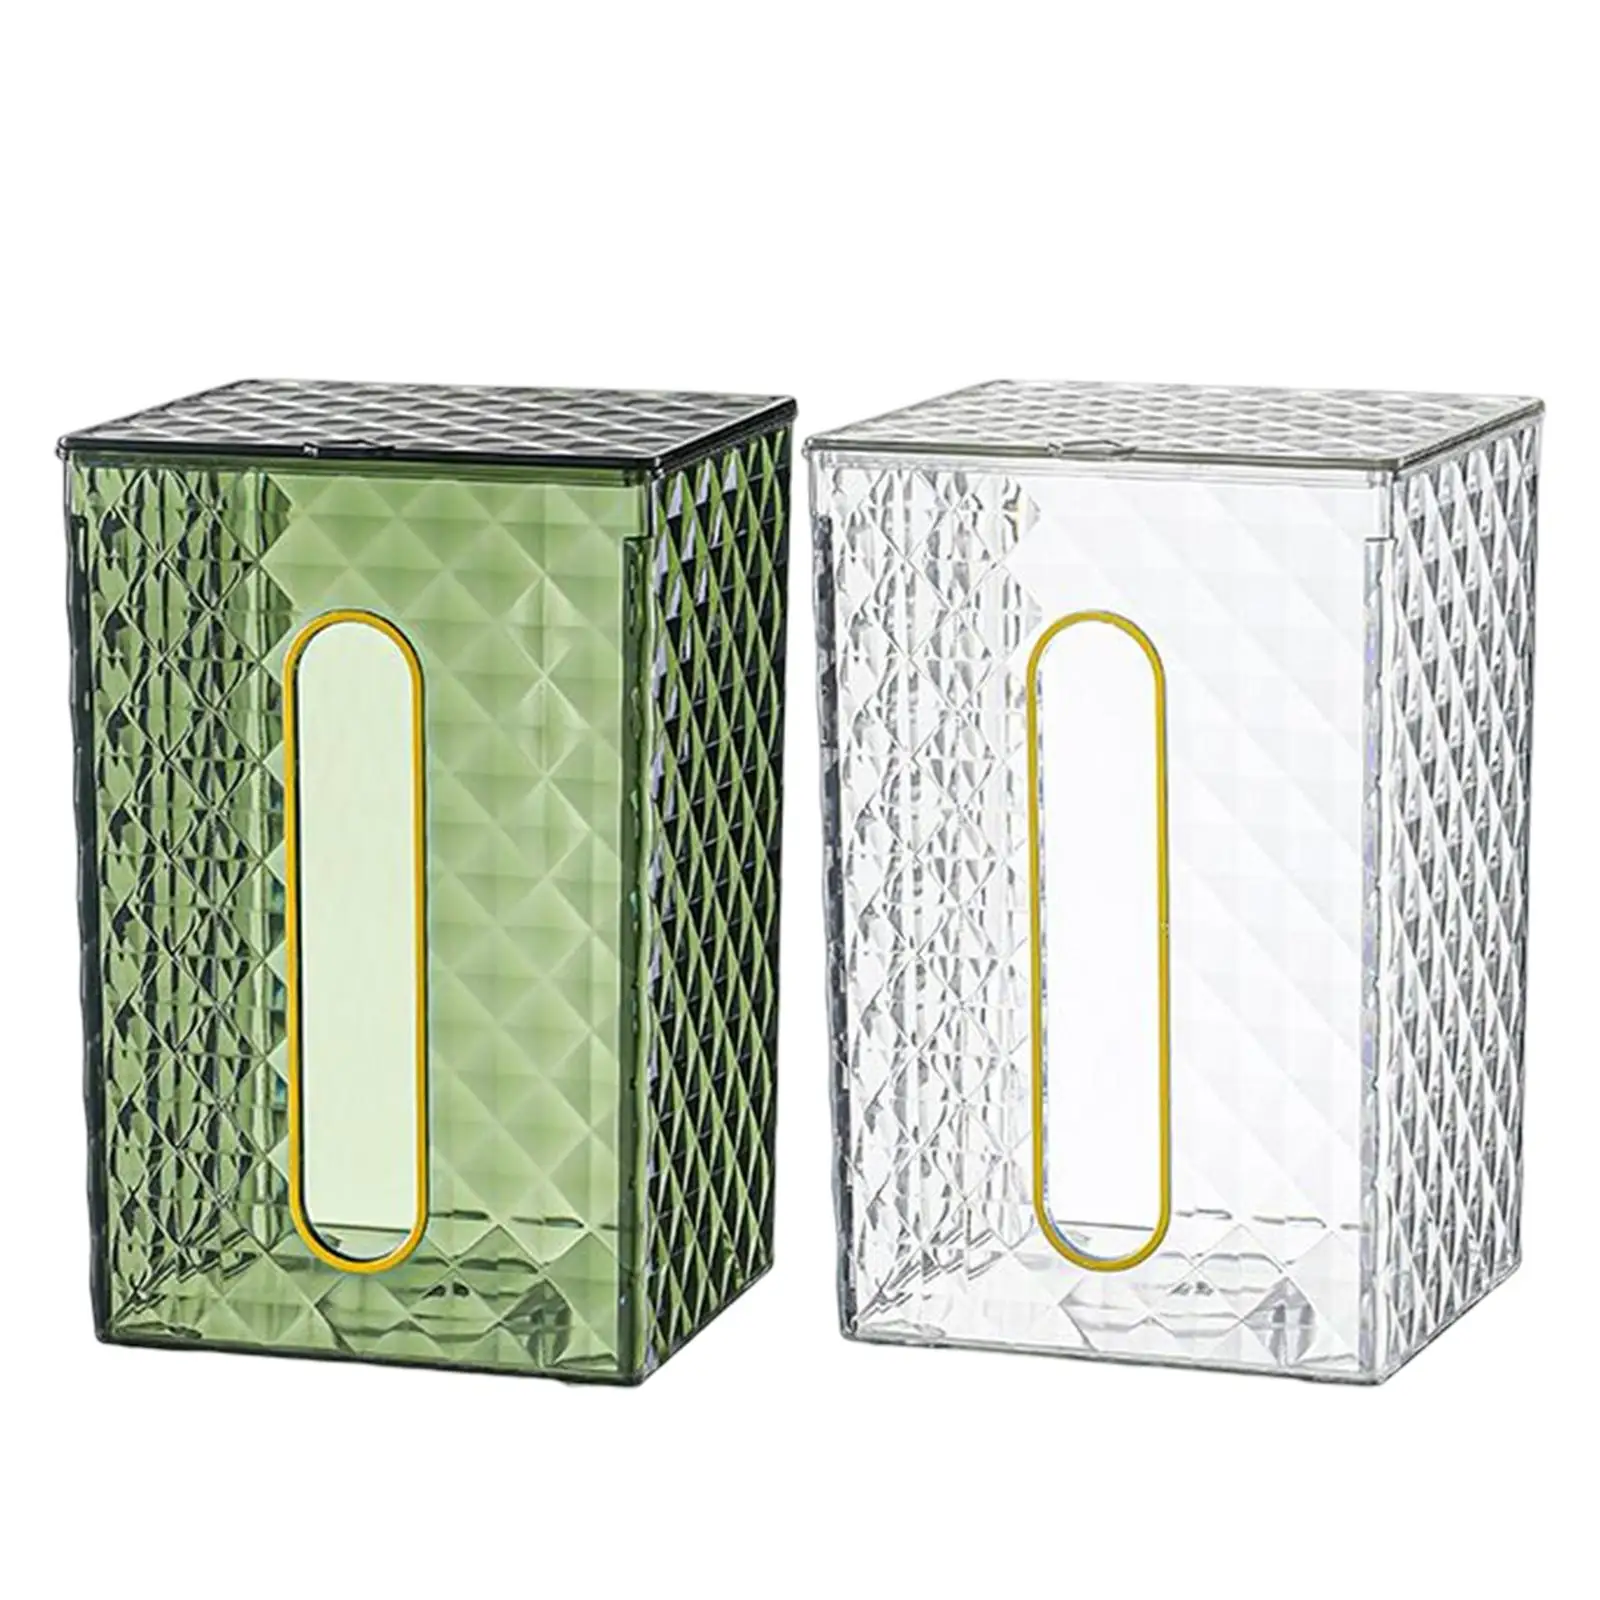 Toilet Paper Tissue Wall Mounted Organizer Strong Bearing Modern Decorate Storage Facial Napkin Box Cover for Home